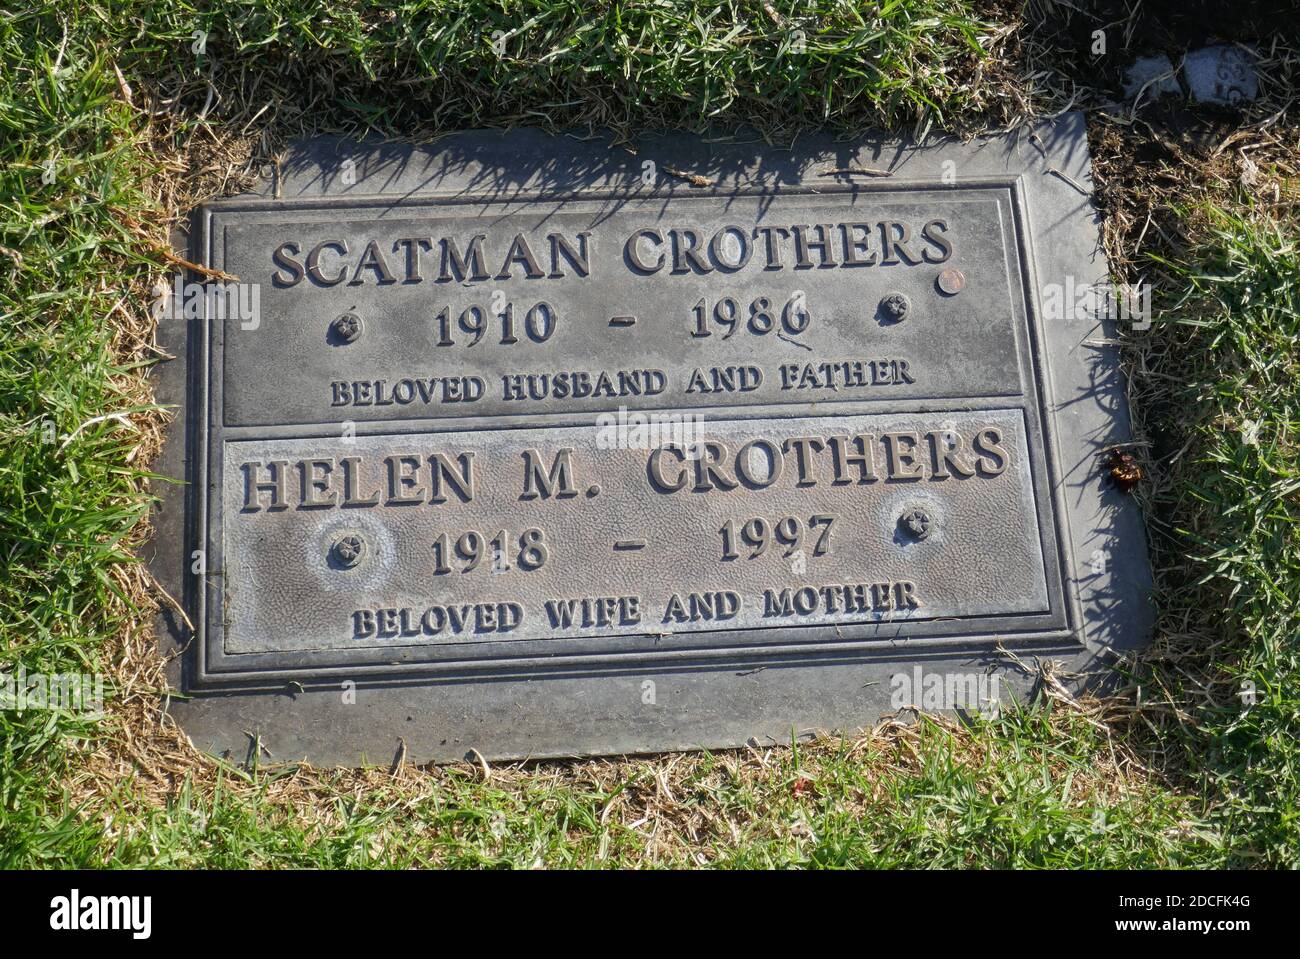 Los Angeles, California, USA 19th November 2020 A general view of atmosphere of Scatman Crother's Grave at Forest Lawn Memorial Park on November 19, 2020 in Los Angeles, California, USA. Photo by Barry King/Alamy Stock Photo Stock Photo